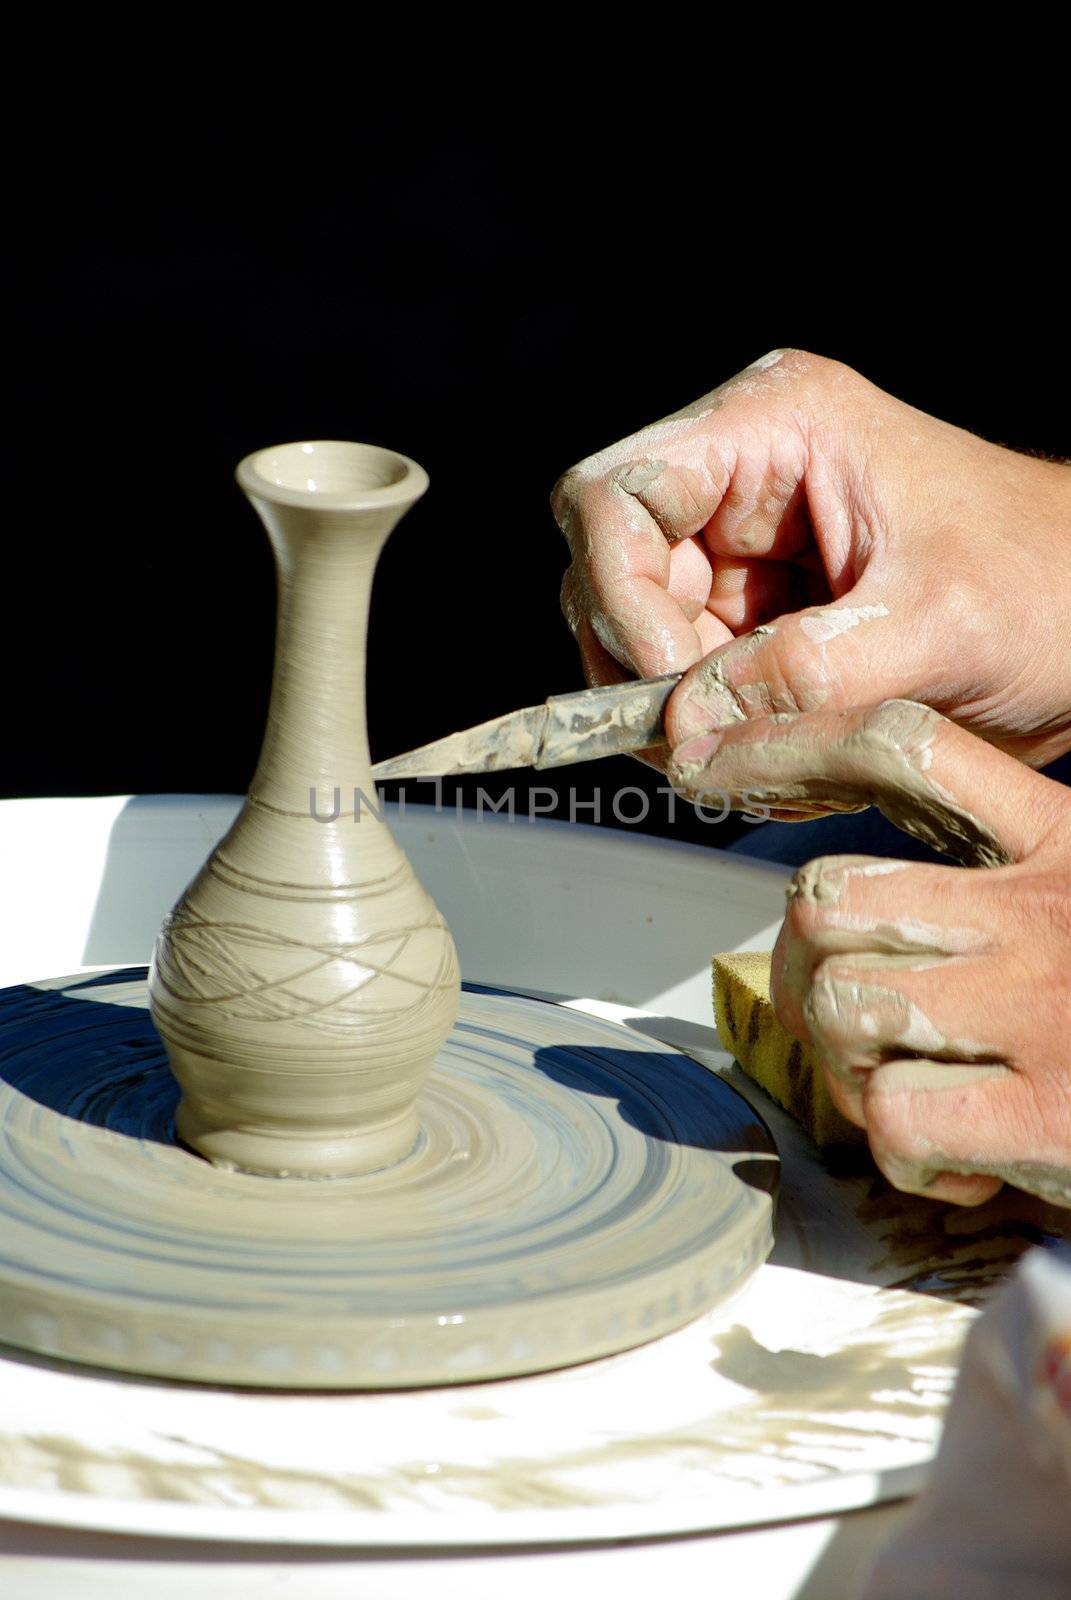 Potter's hands at work on decorating crude clay pot on the jigger